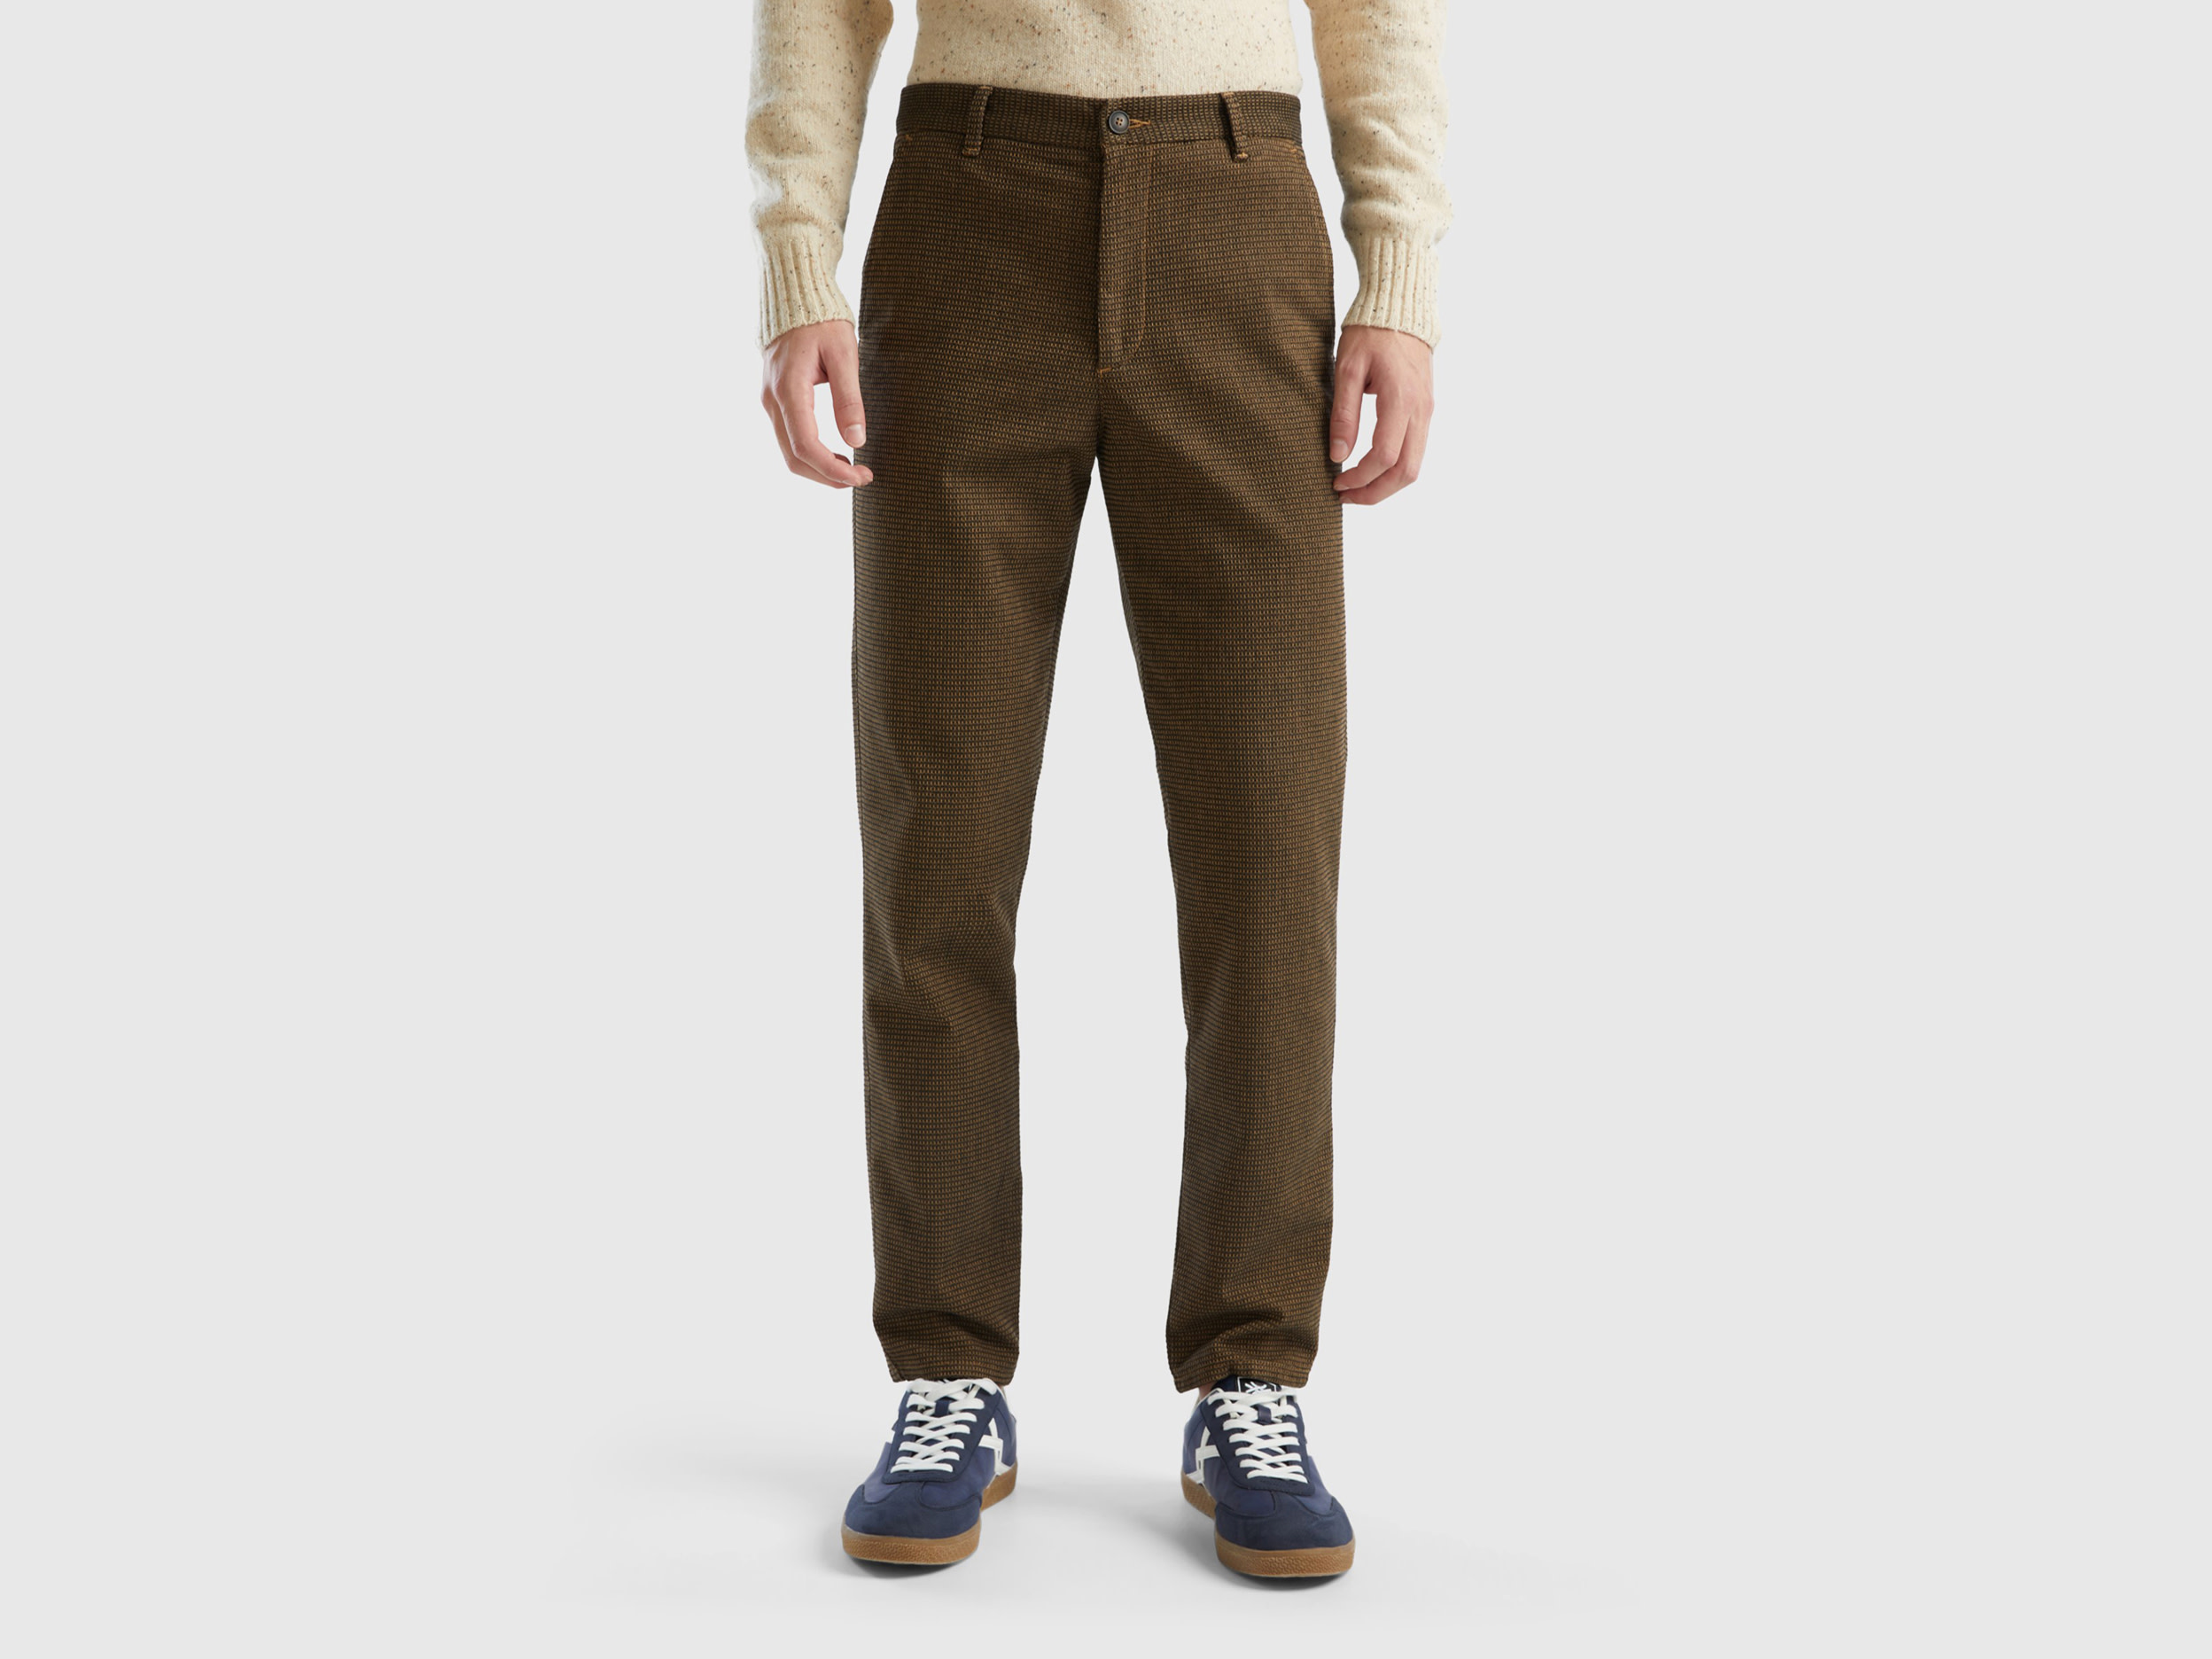 Benetton, Slim Fit Chinos With Dropped Crotch, size 42, Brown, Men